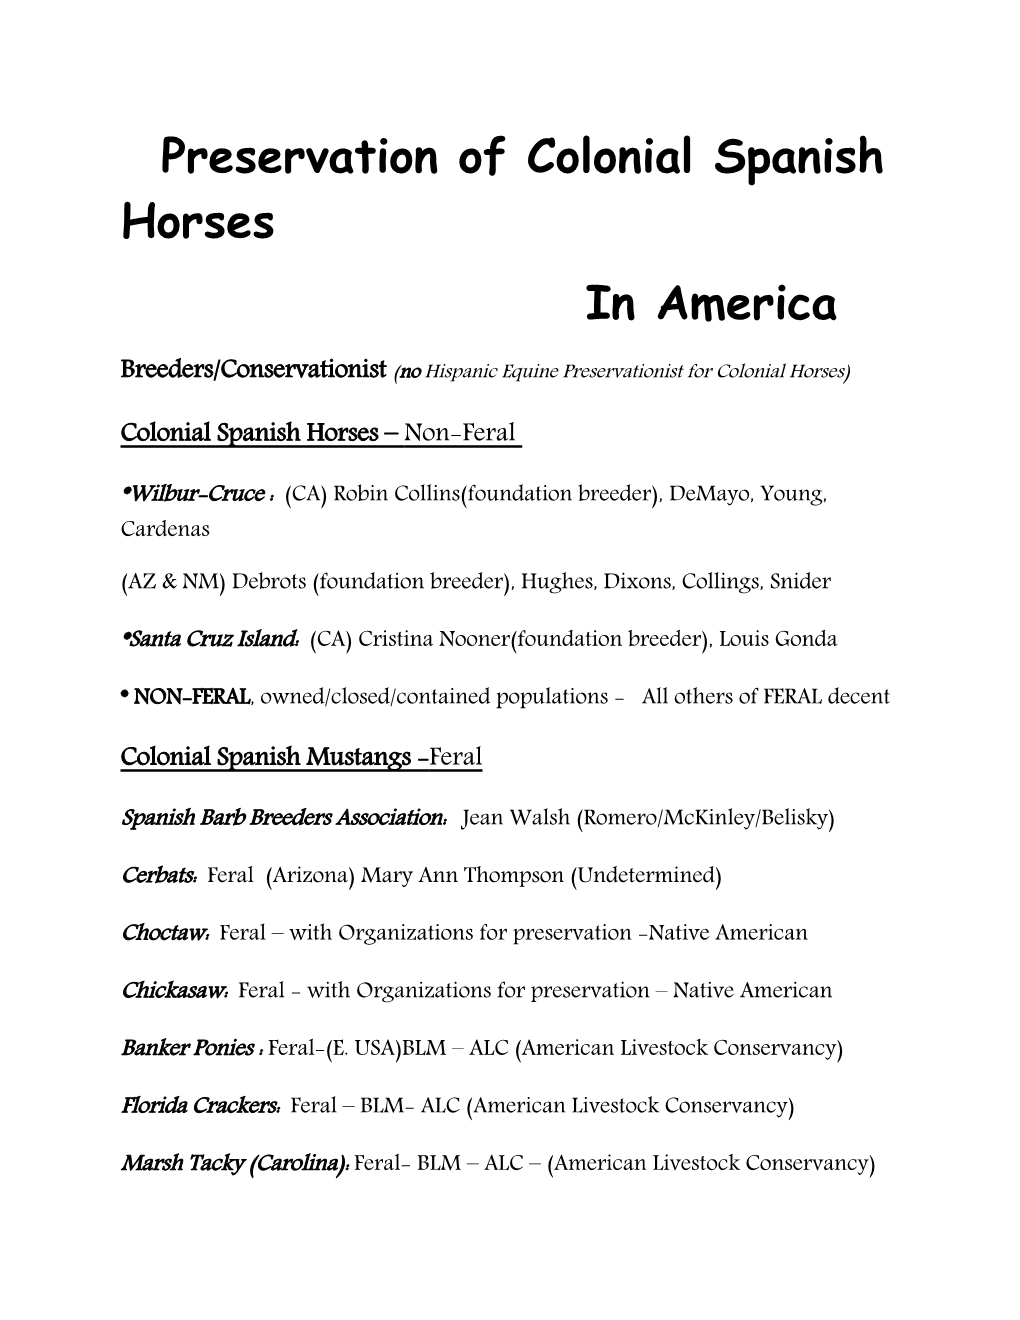 Preservation of Colonial Spanish Horses